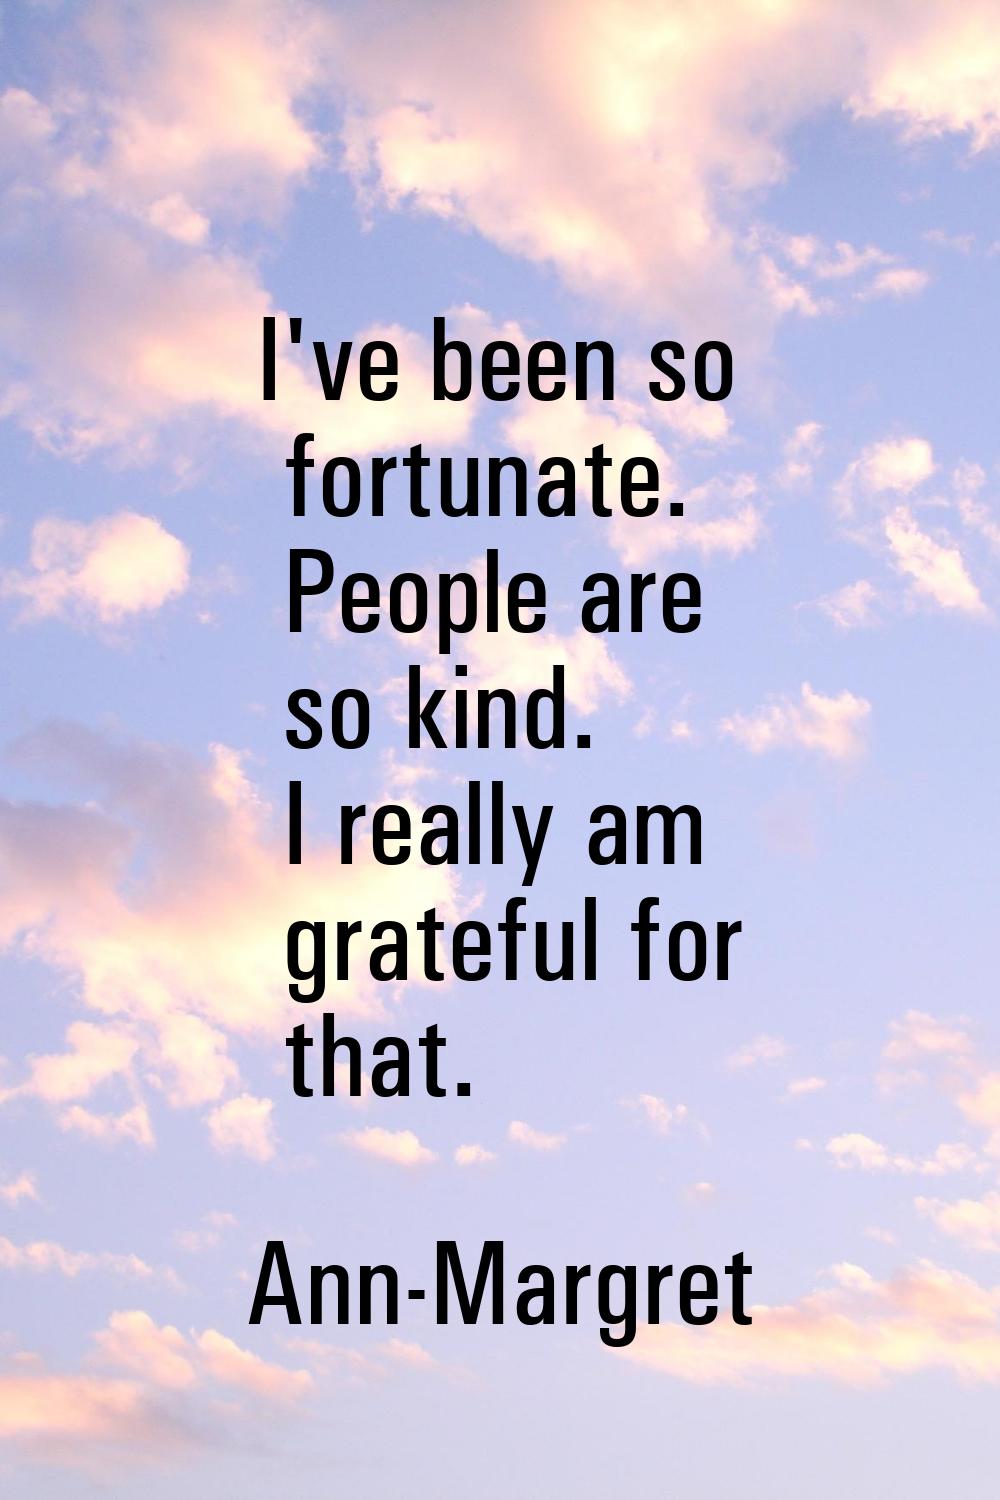 I've been so fortunate. People are so kind. I really am grateful for that.